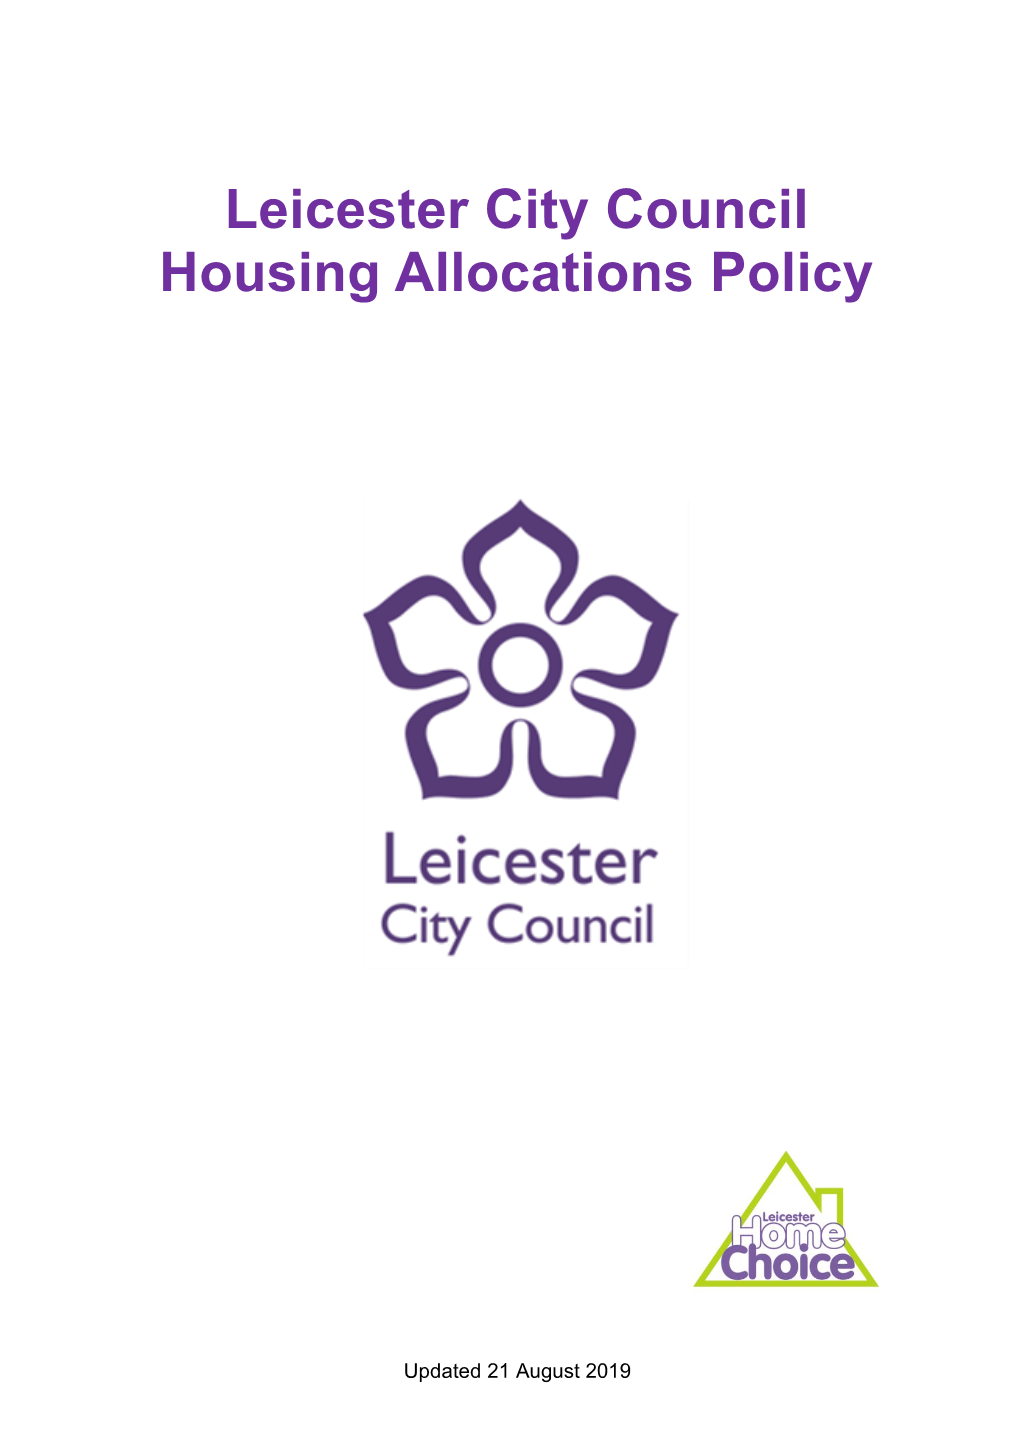 Housing Allocations Policy (August 2019)